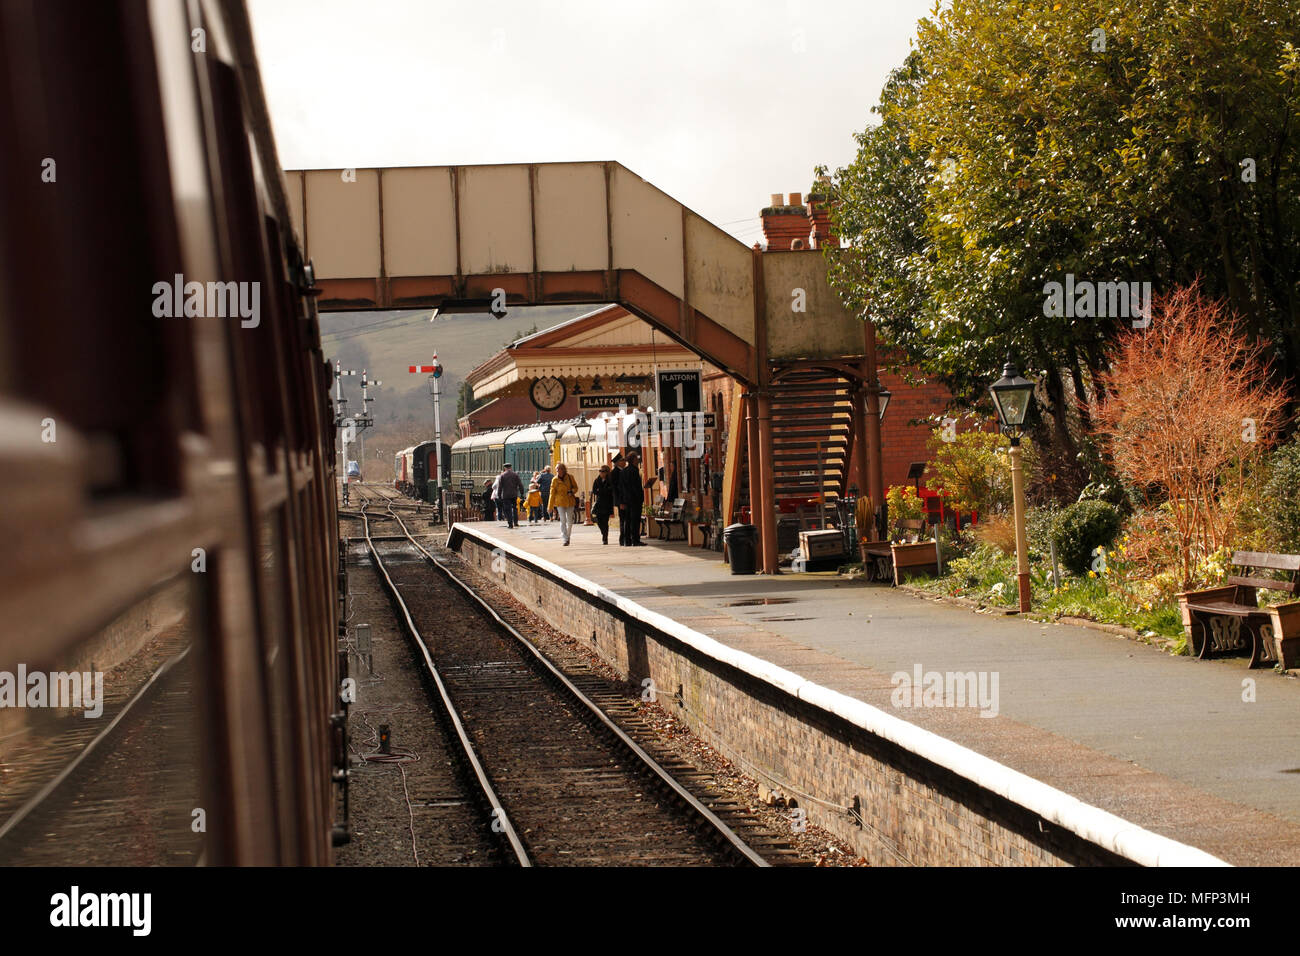 Gloucestershire Warwickshire et Steam Railway collection. Station. Banque D'Images